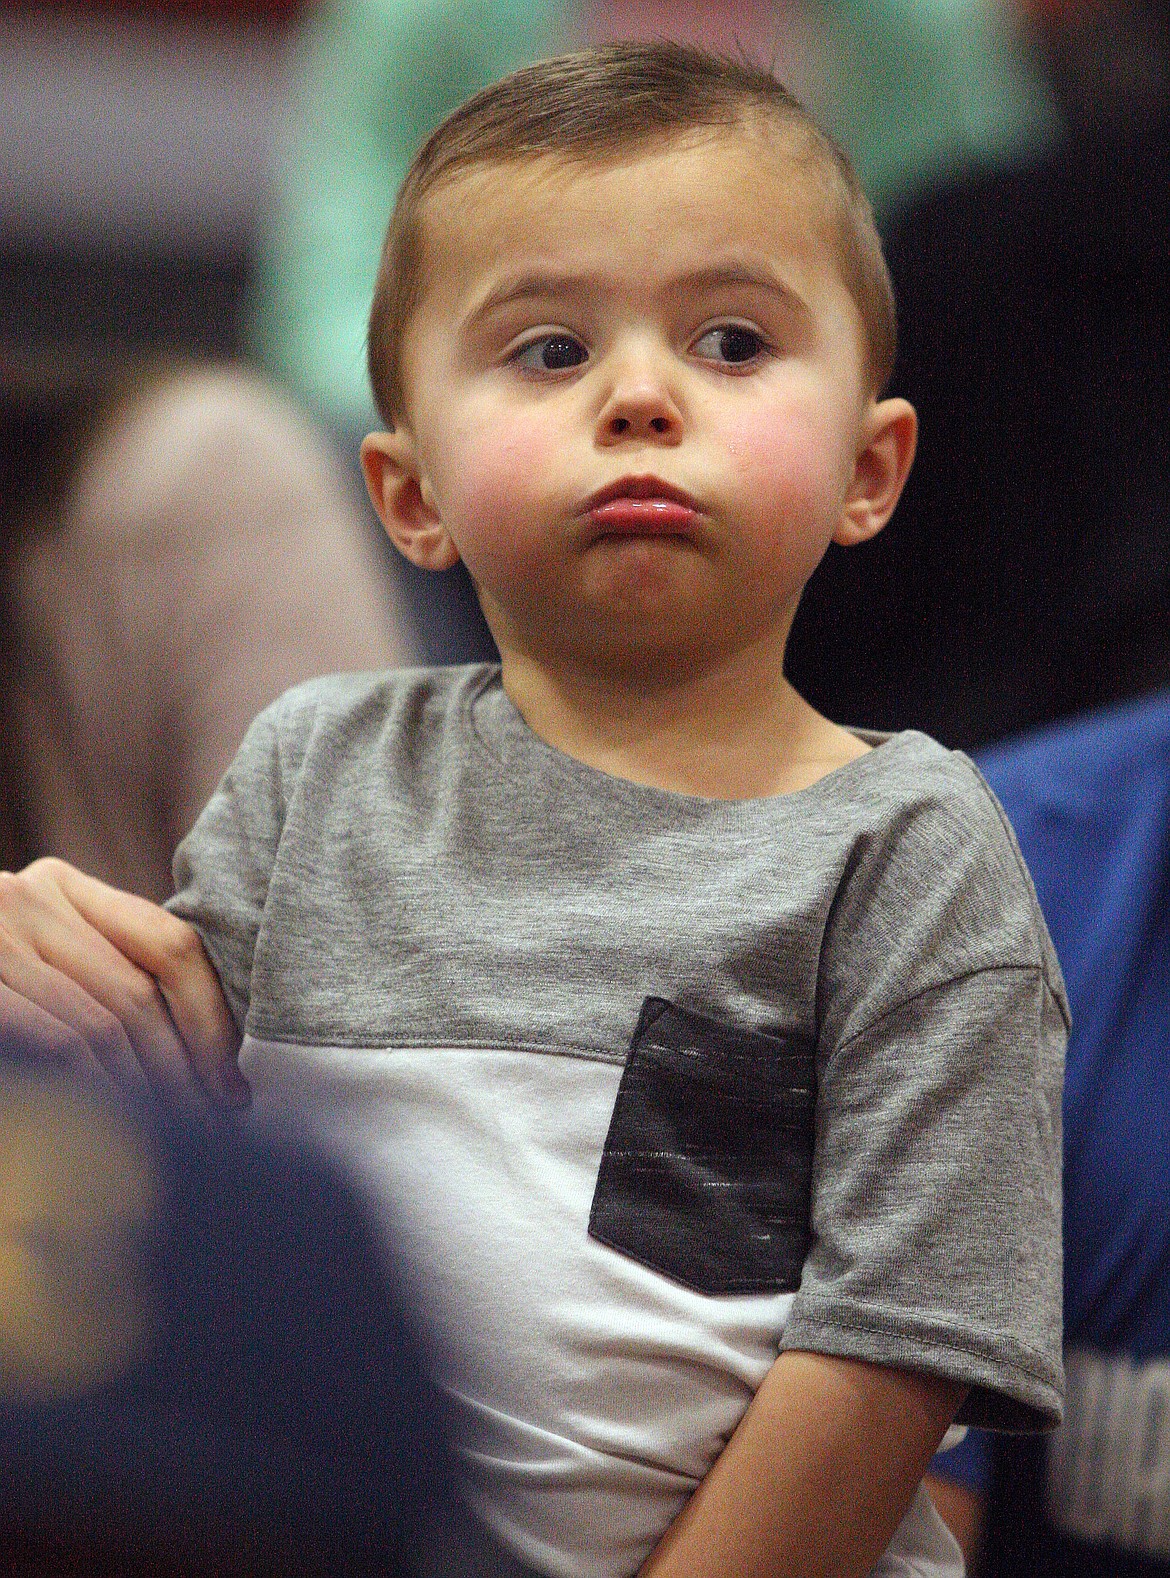 Rodney Harwood/Columbia Basin Herald
Two-year-old Tayton Jaderlund of Warden takes in the action at the SCAC District tournament at Zillah Alumni Gym on Saturday.